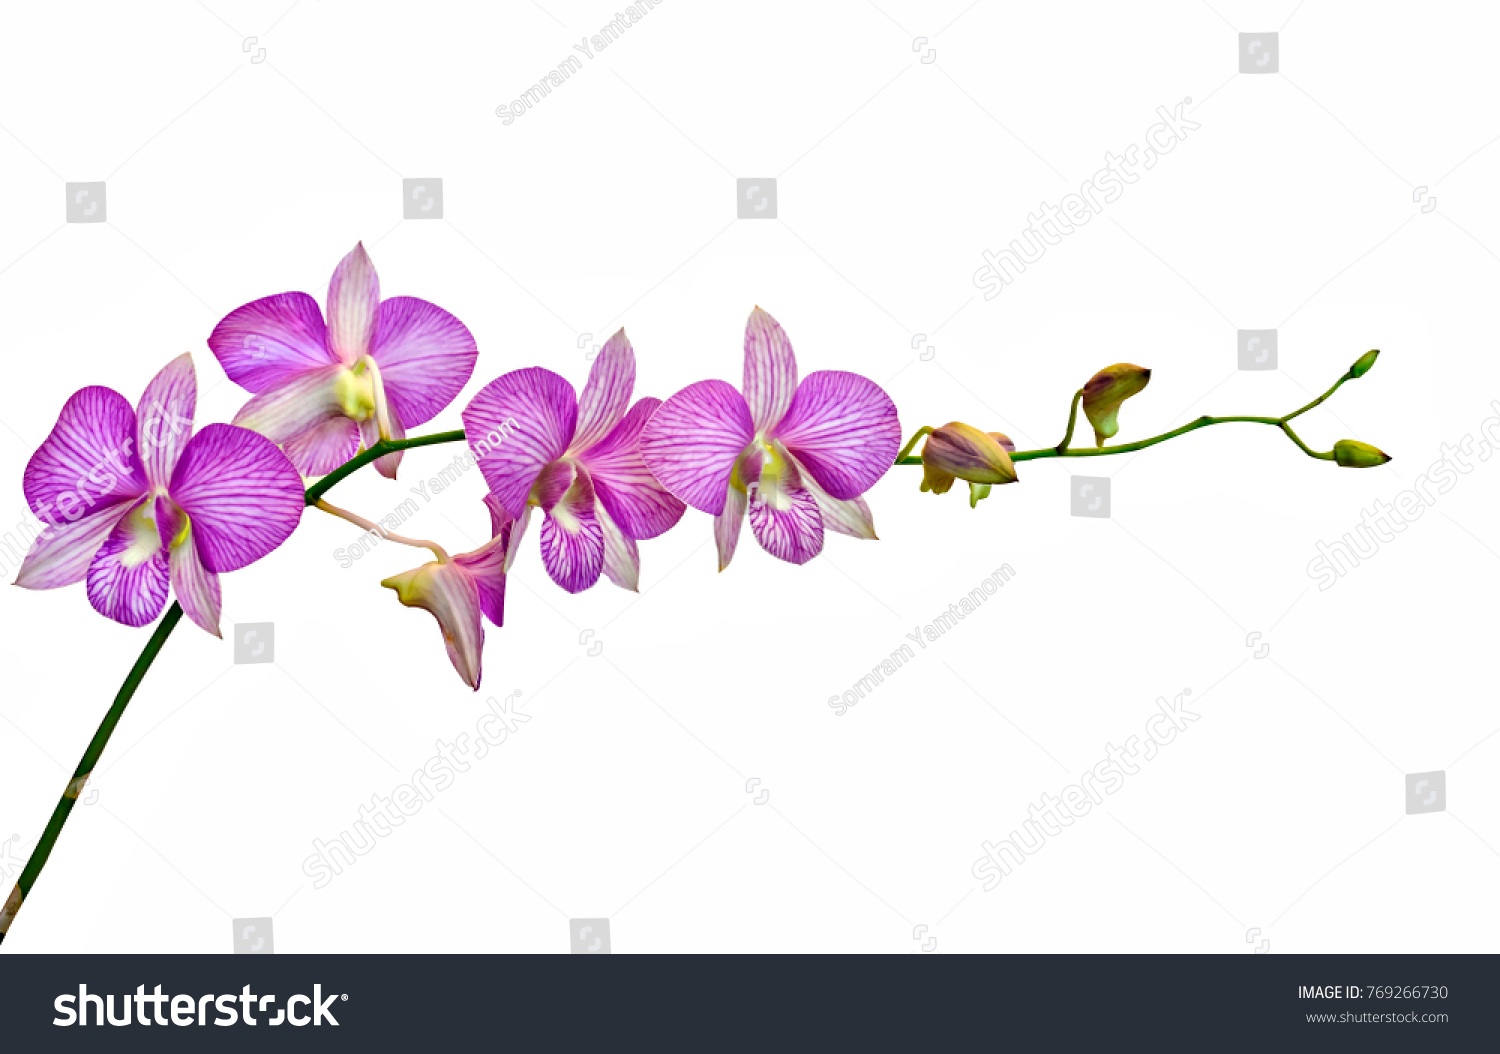 pink Phalaenopsis or Moth dendrobium Orchid flower in winter or spring day tropical garden isolated on white background.Selective focus.agriculture idea concept design with copy space add text. #769266730